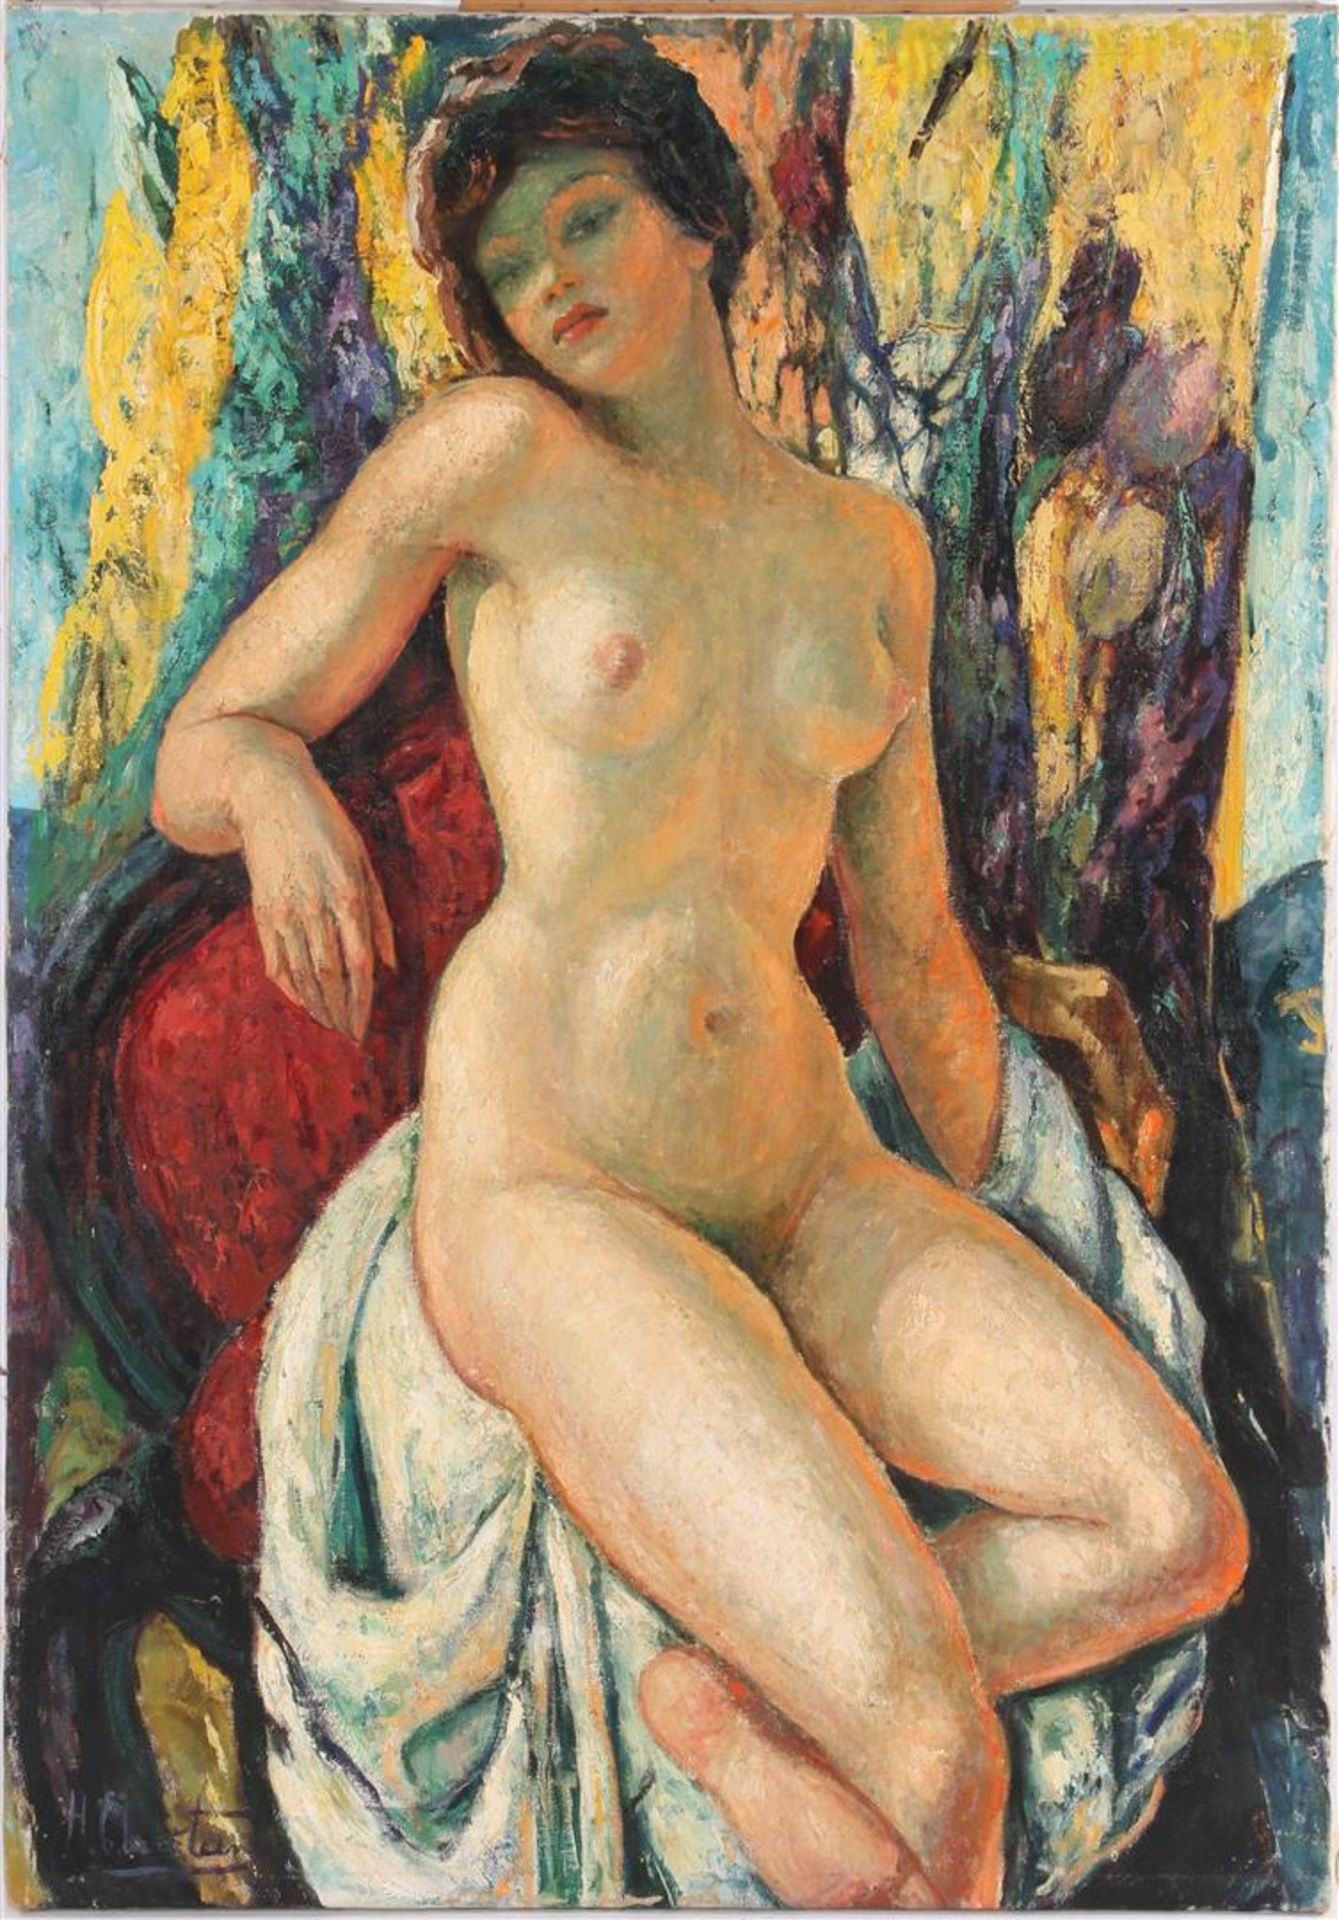 Unclearly signed, Posing nude